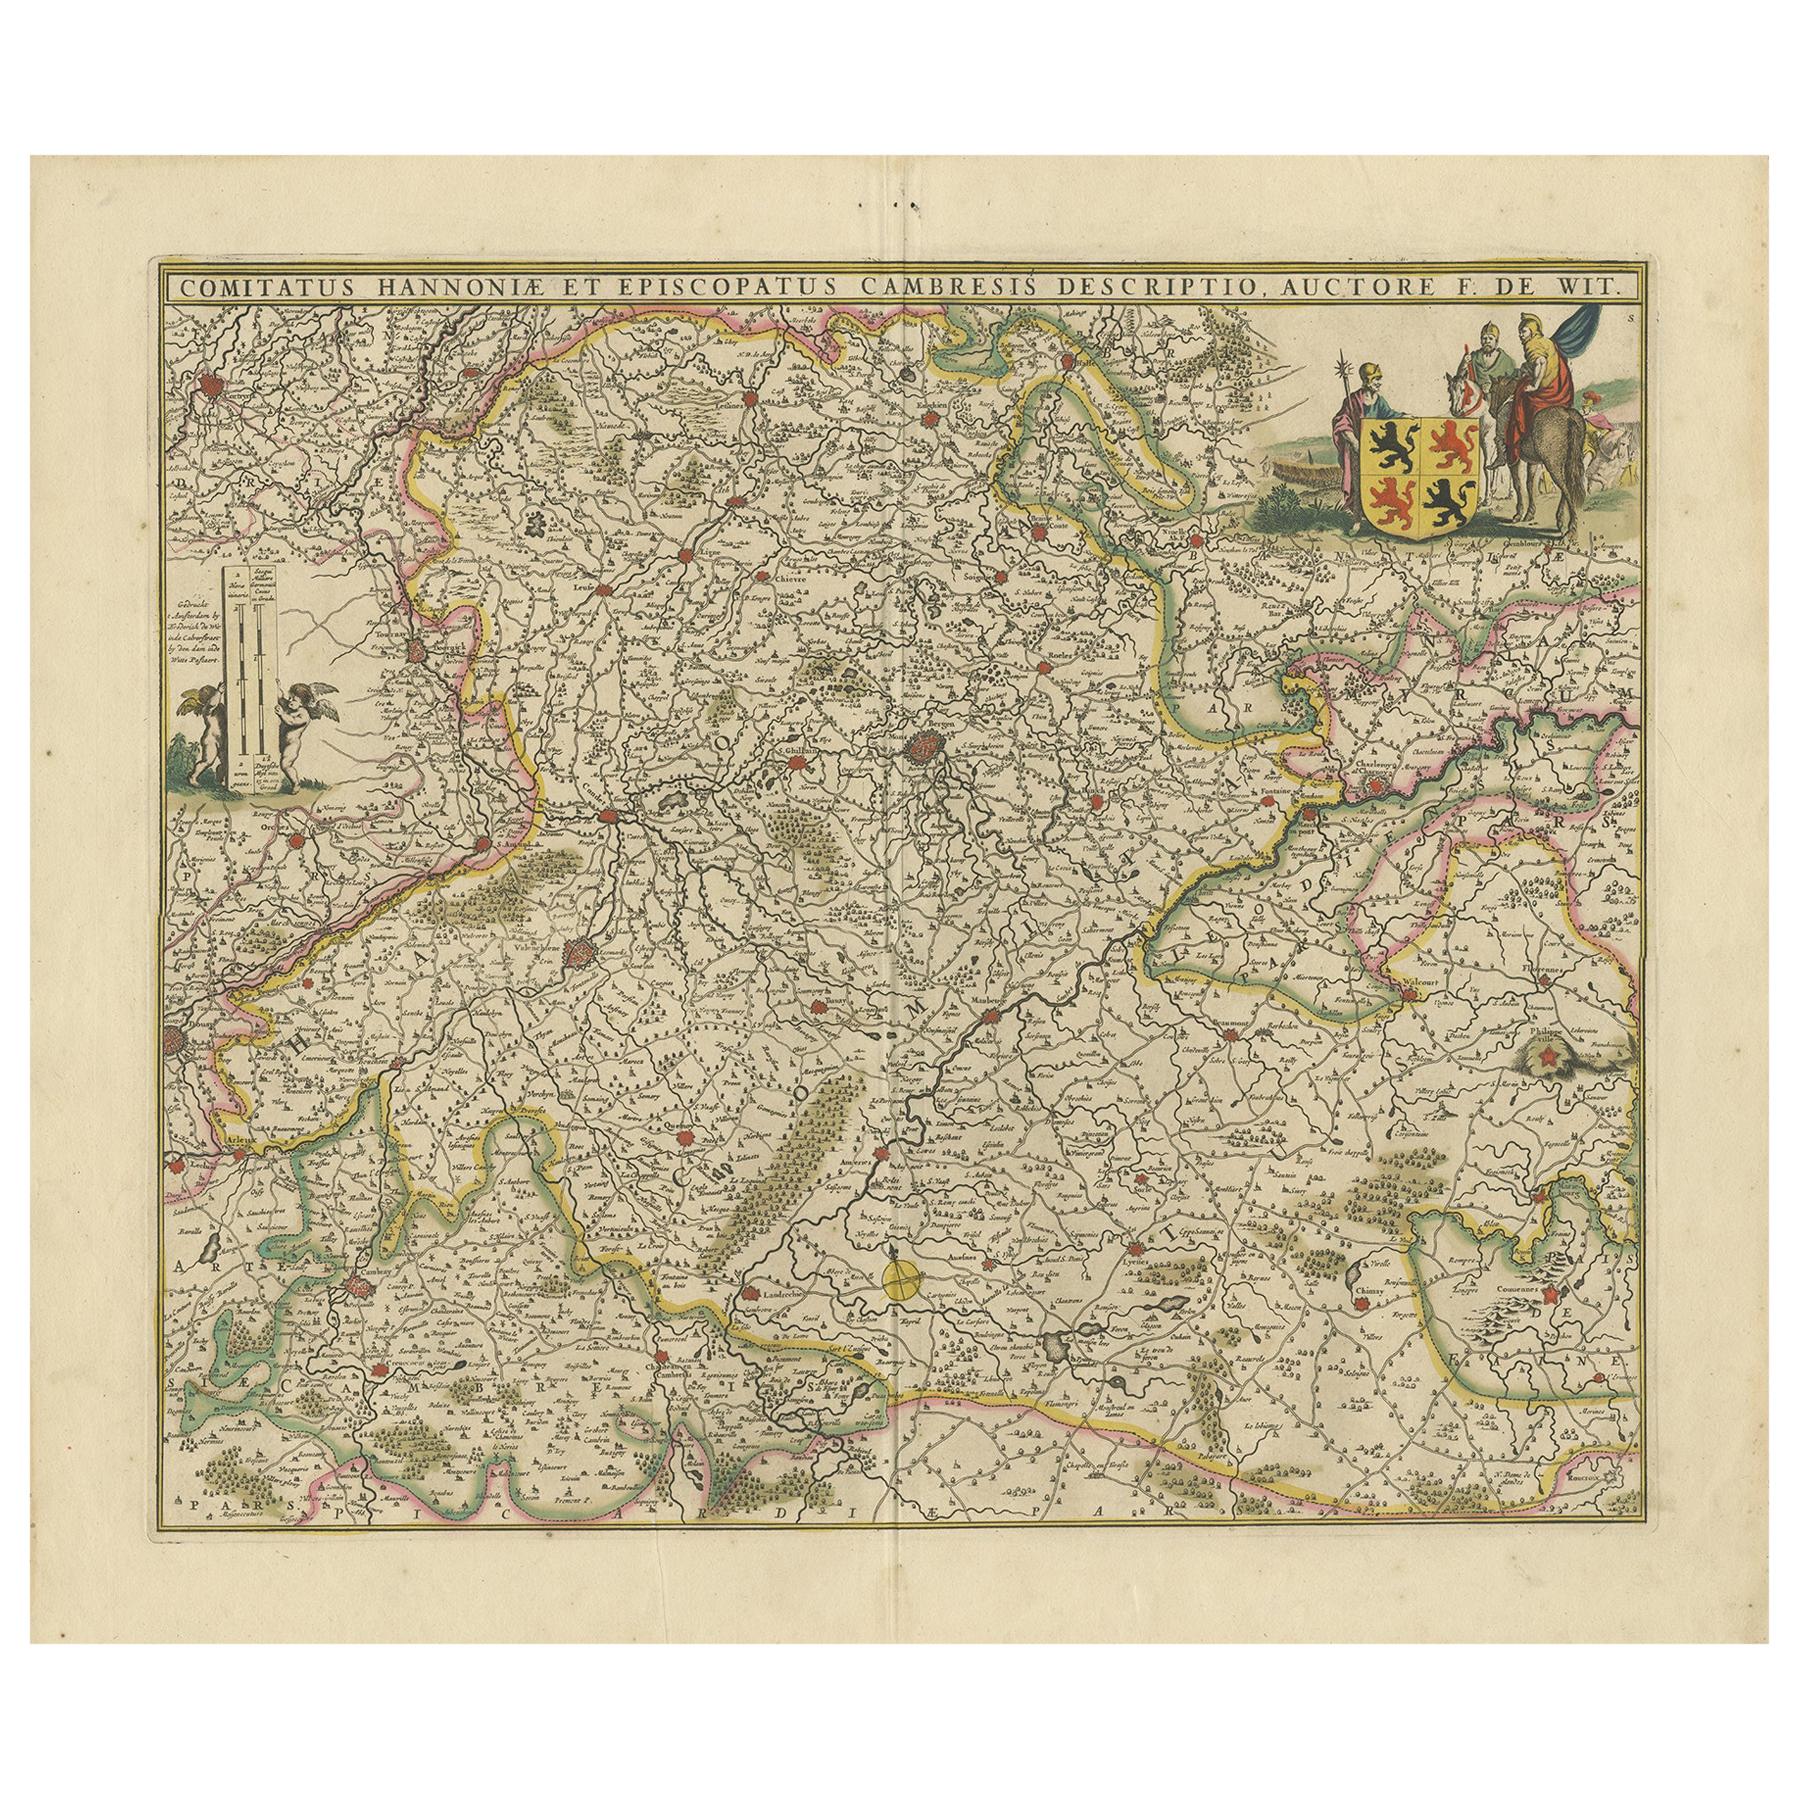 Antique Map of the Hainaut Region 'France' by F. de Wit, circa 1680